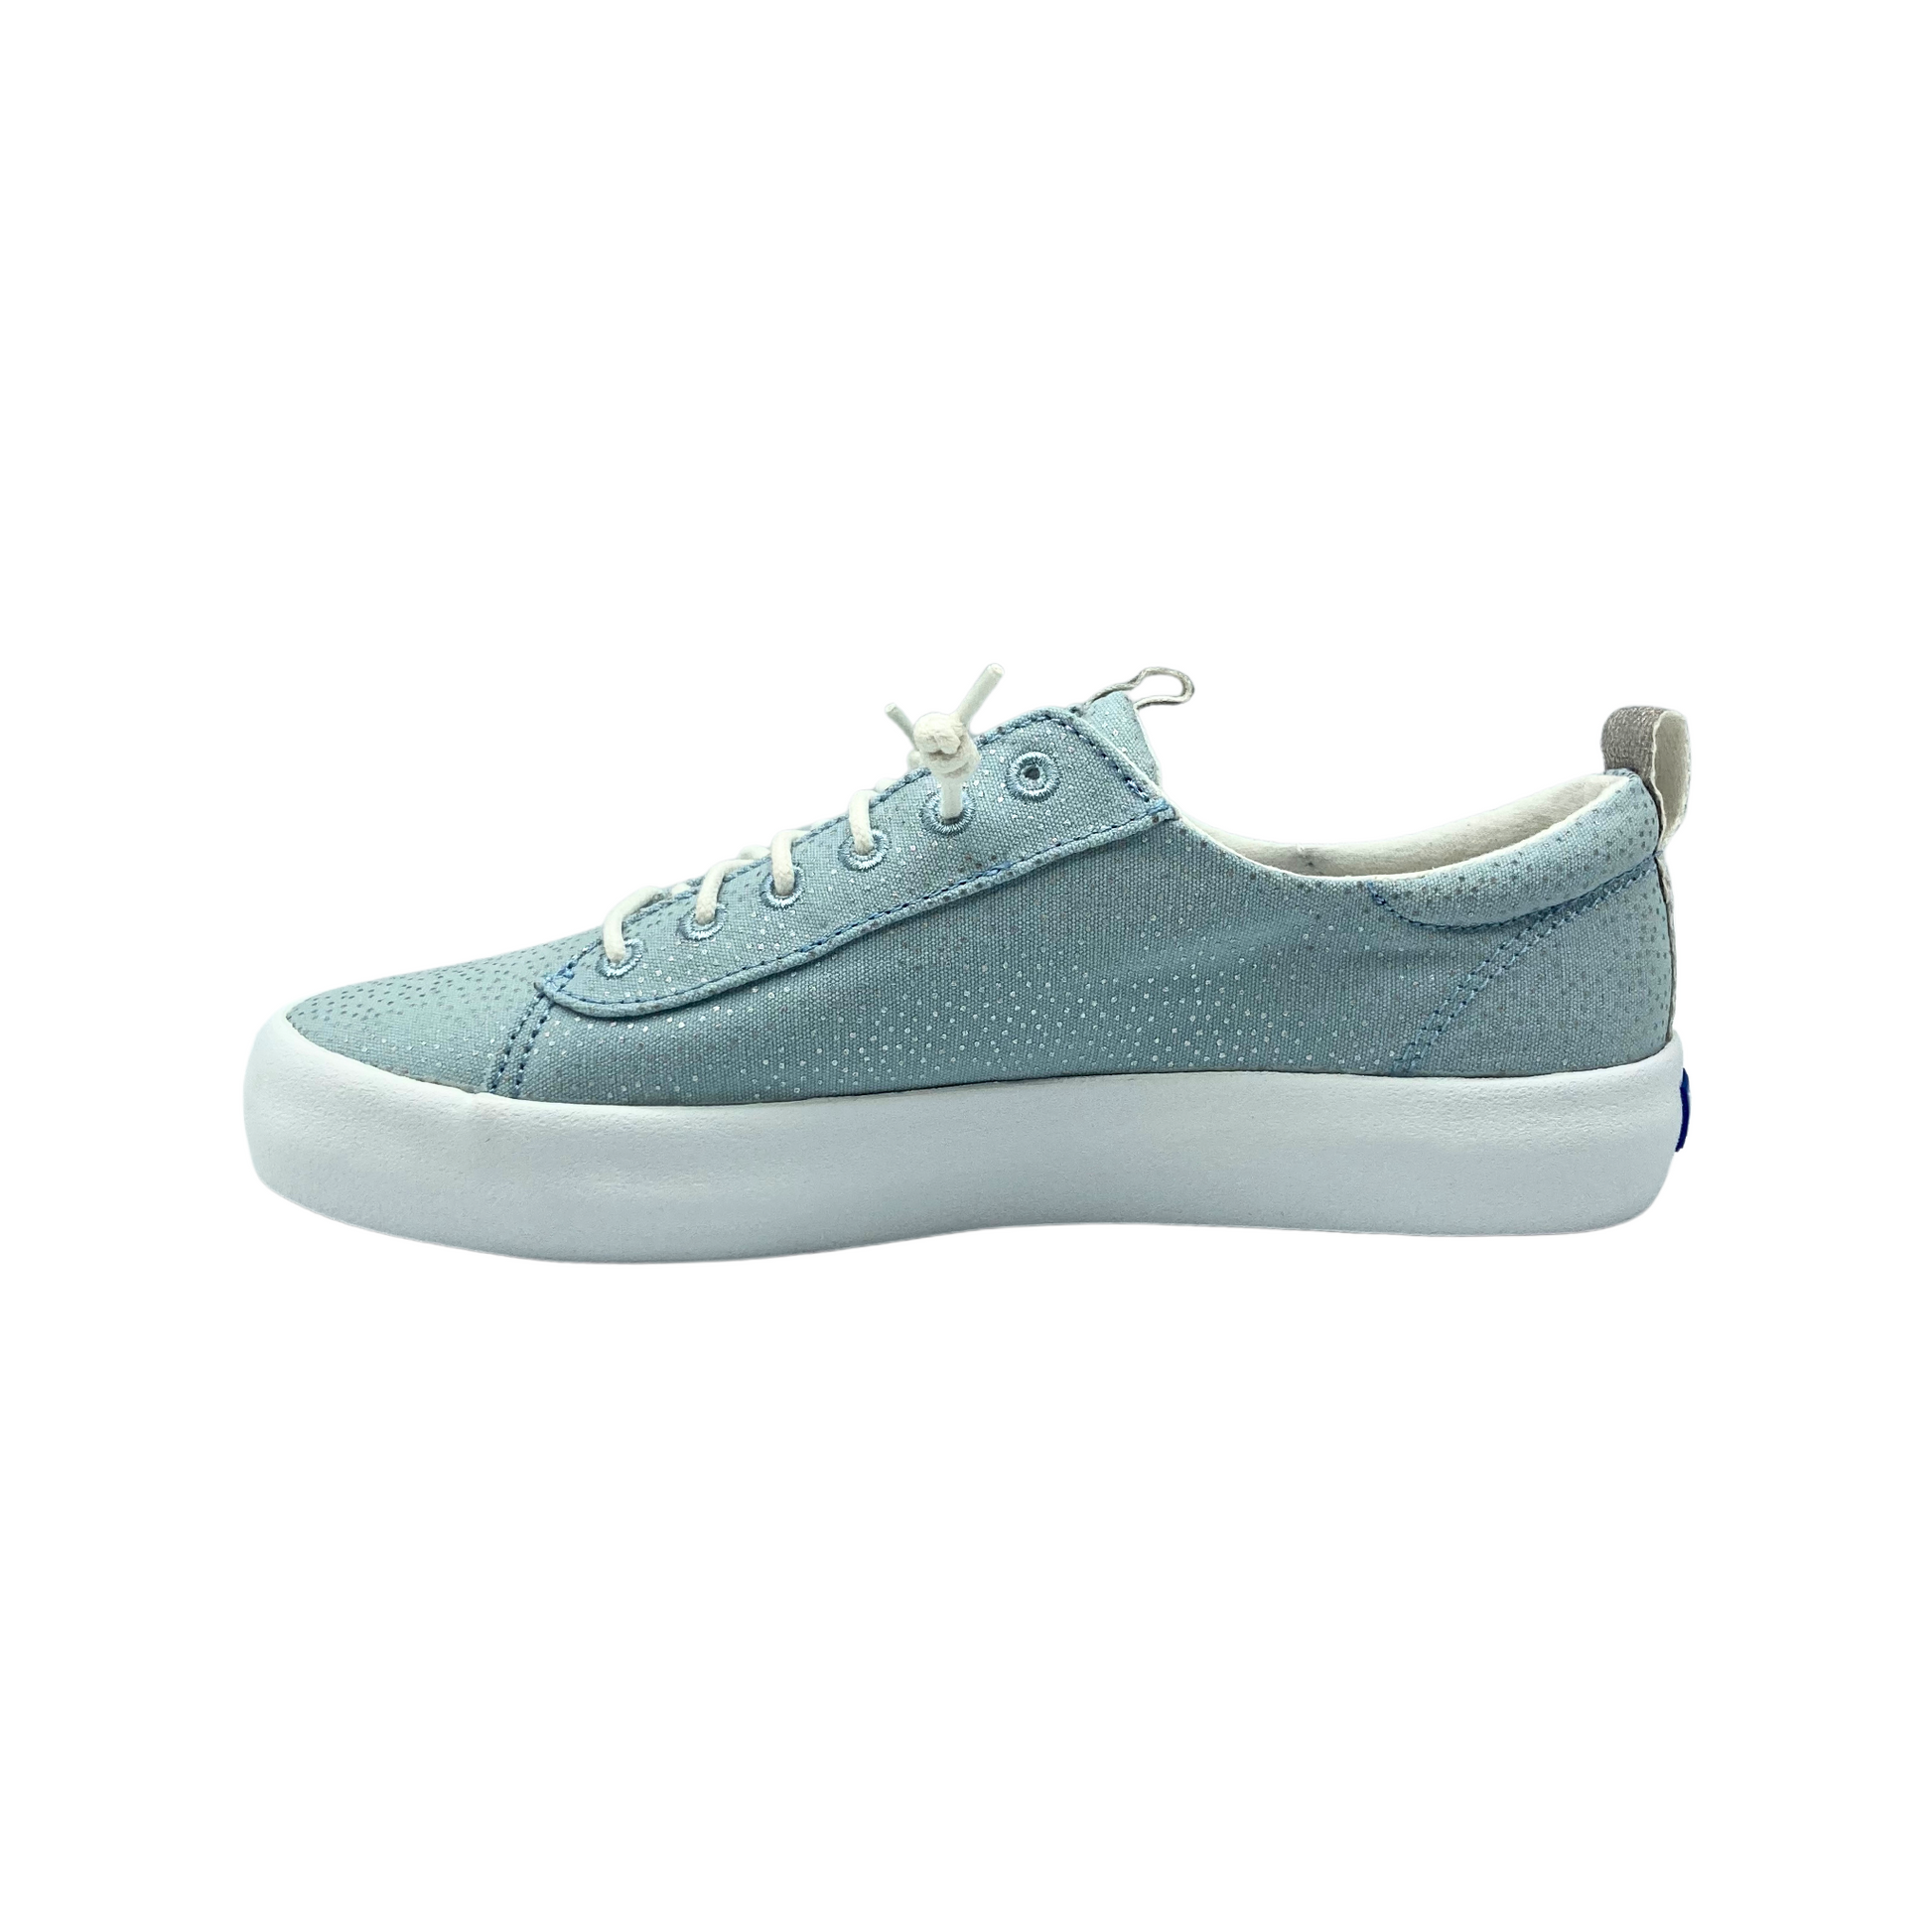 Inside view of a canvas slip on sneaker in a light blue/wilver with a white outsole.